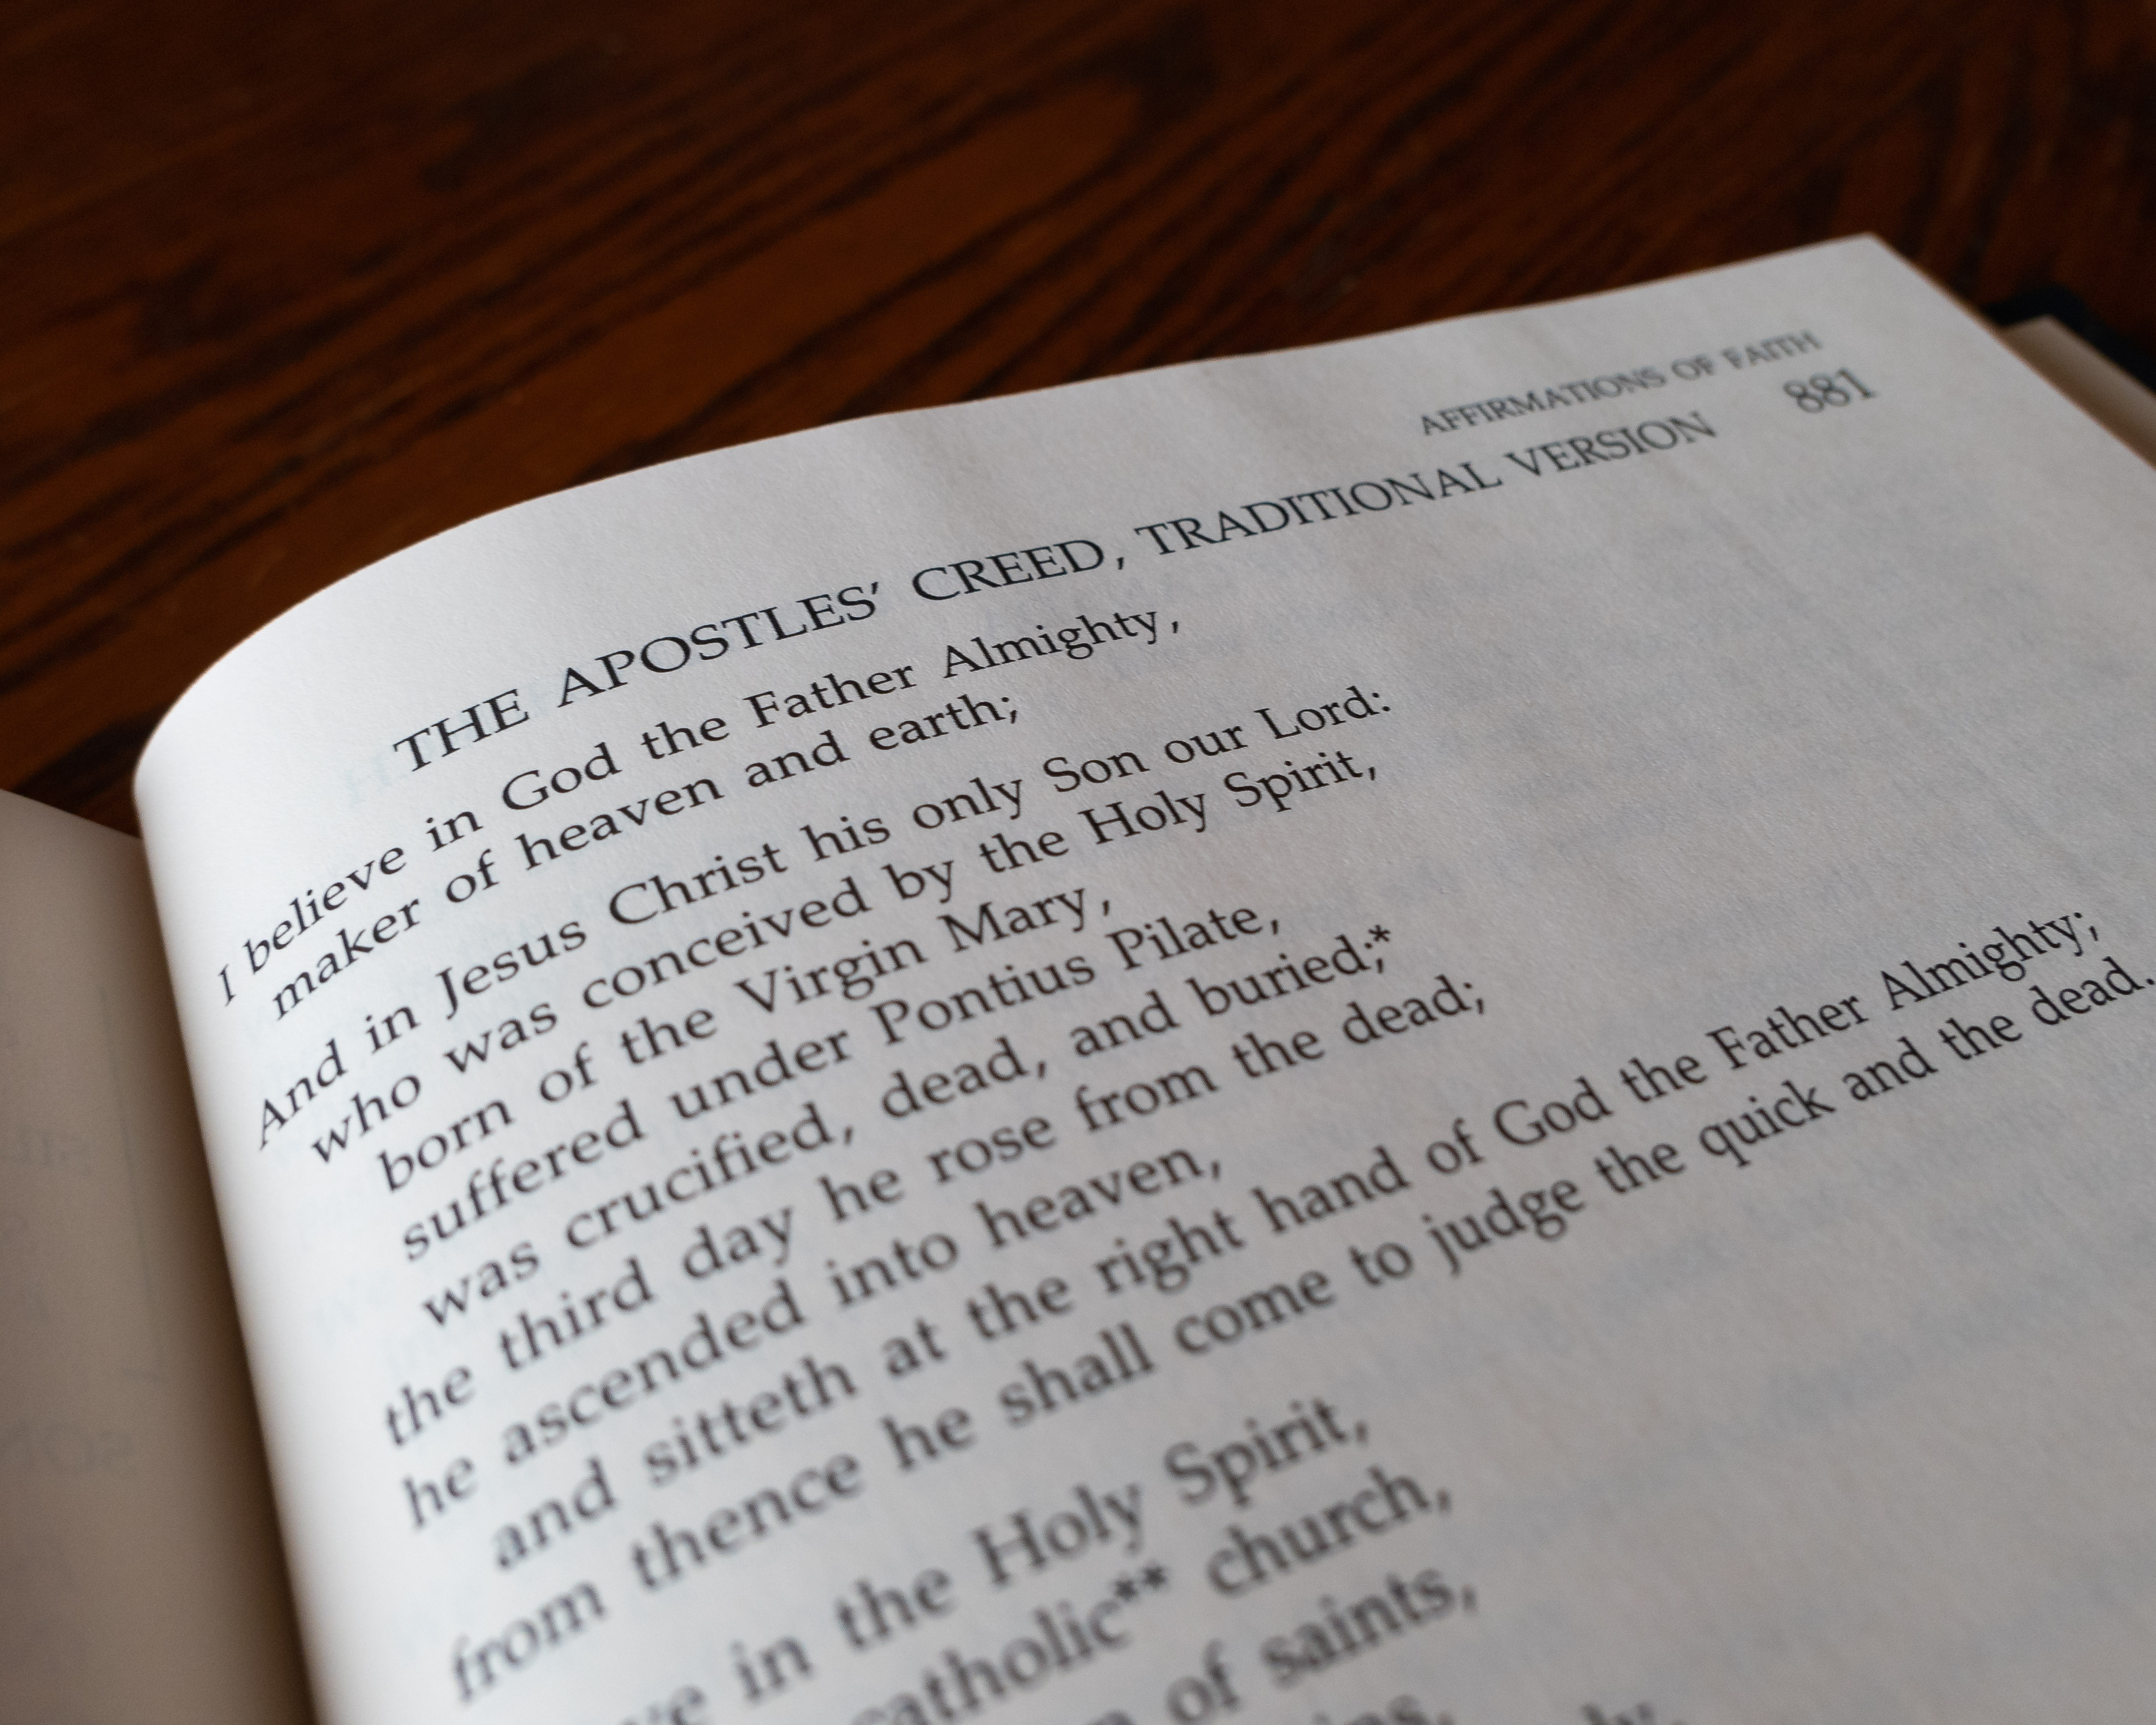 The Apostle’s Creed: The Holy Spirit